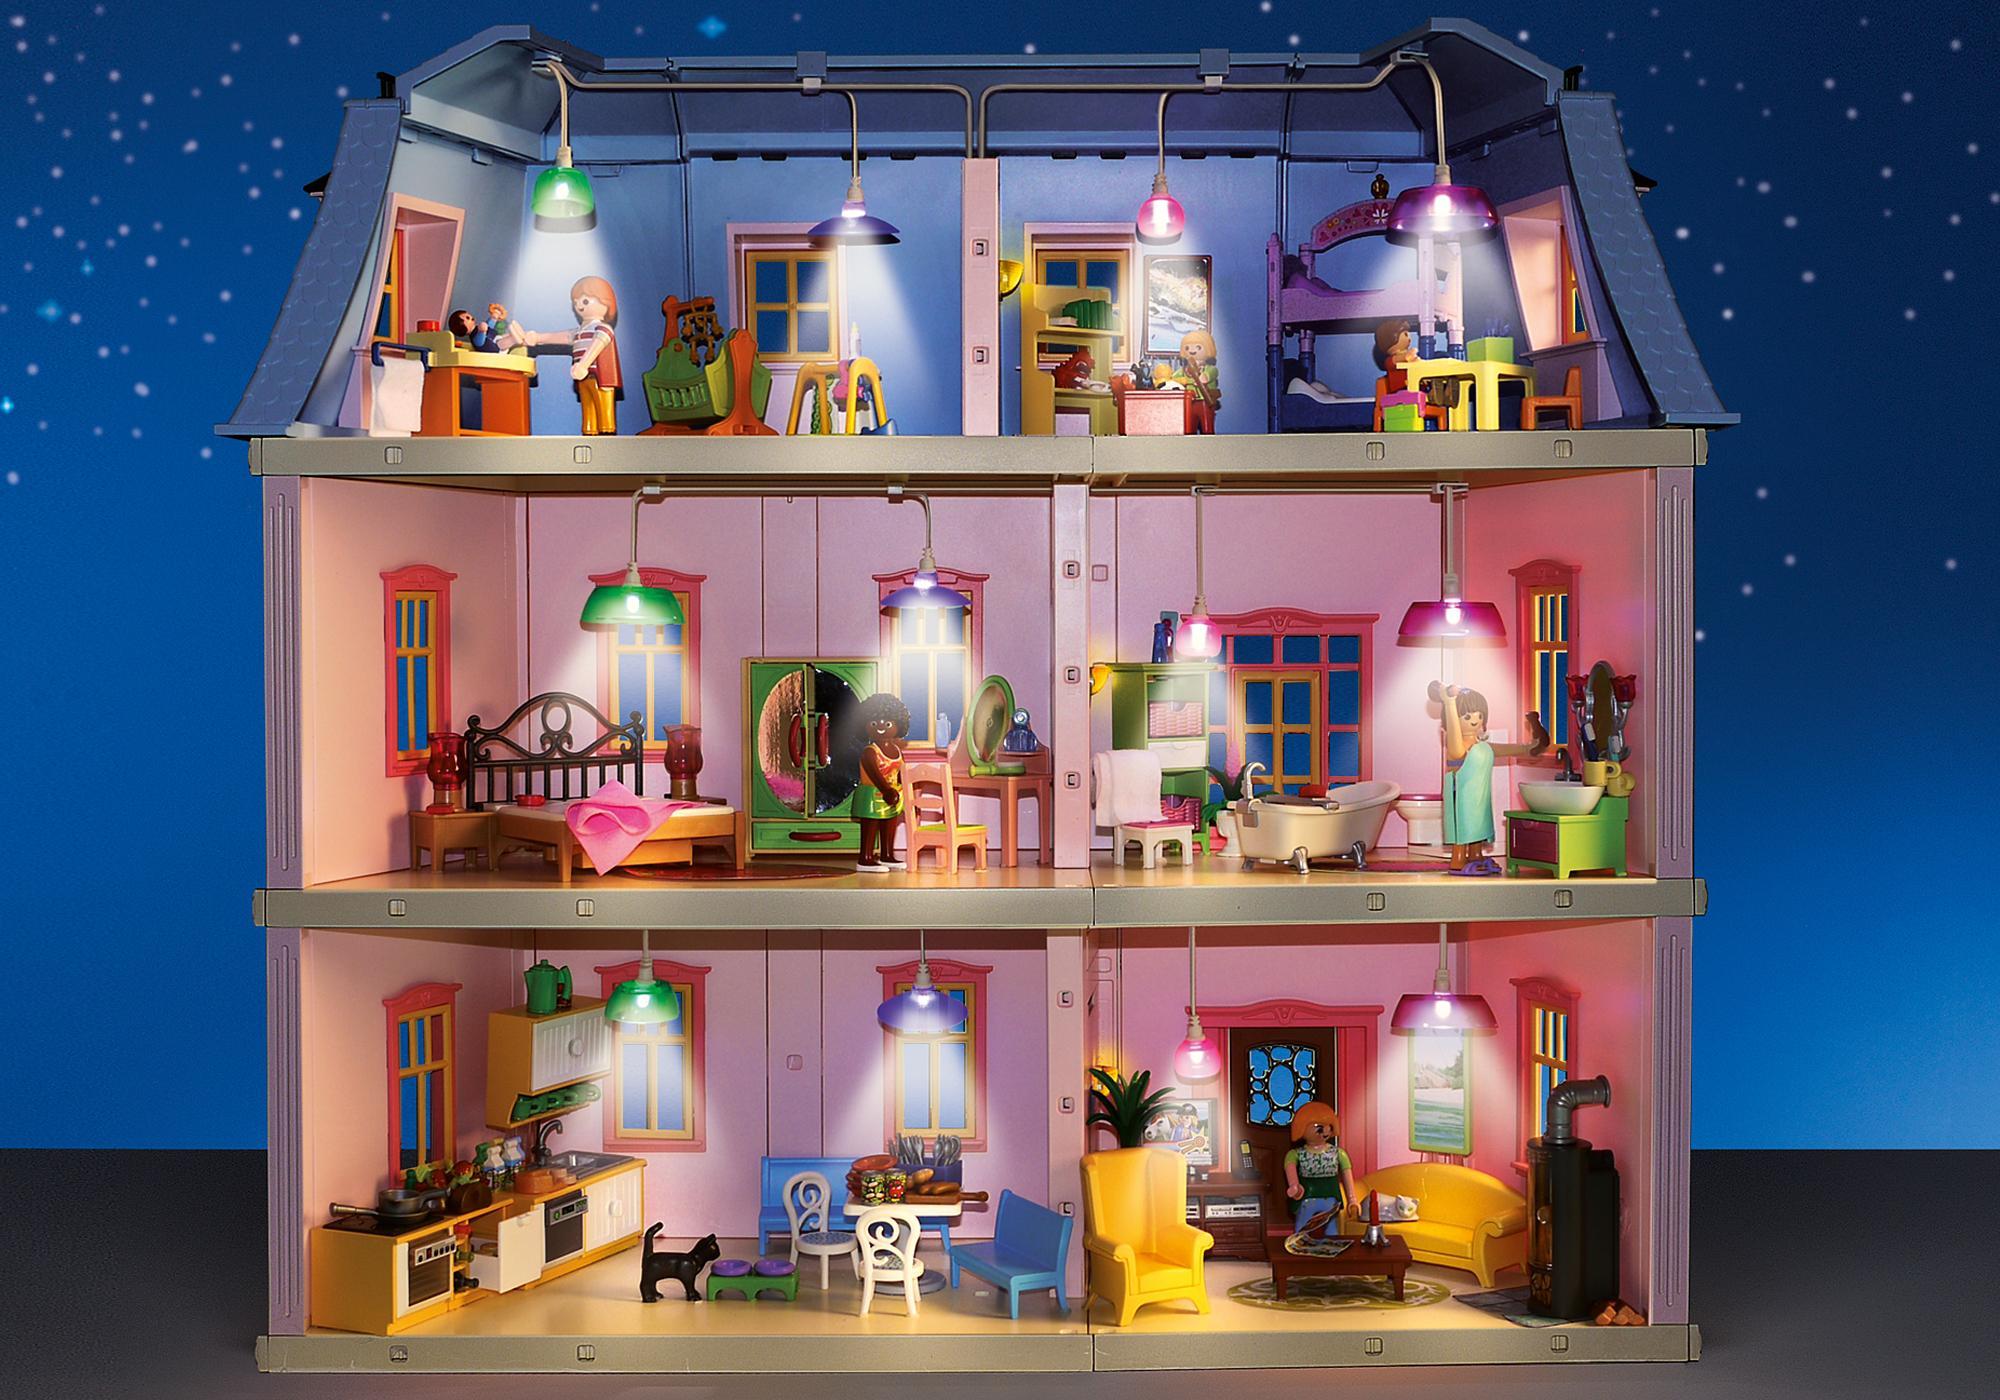 playmobil dolls house accessories